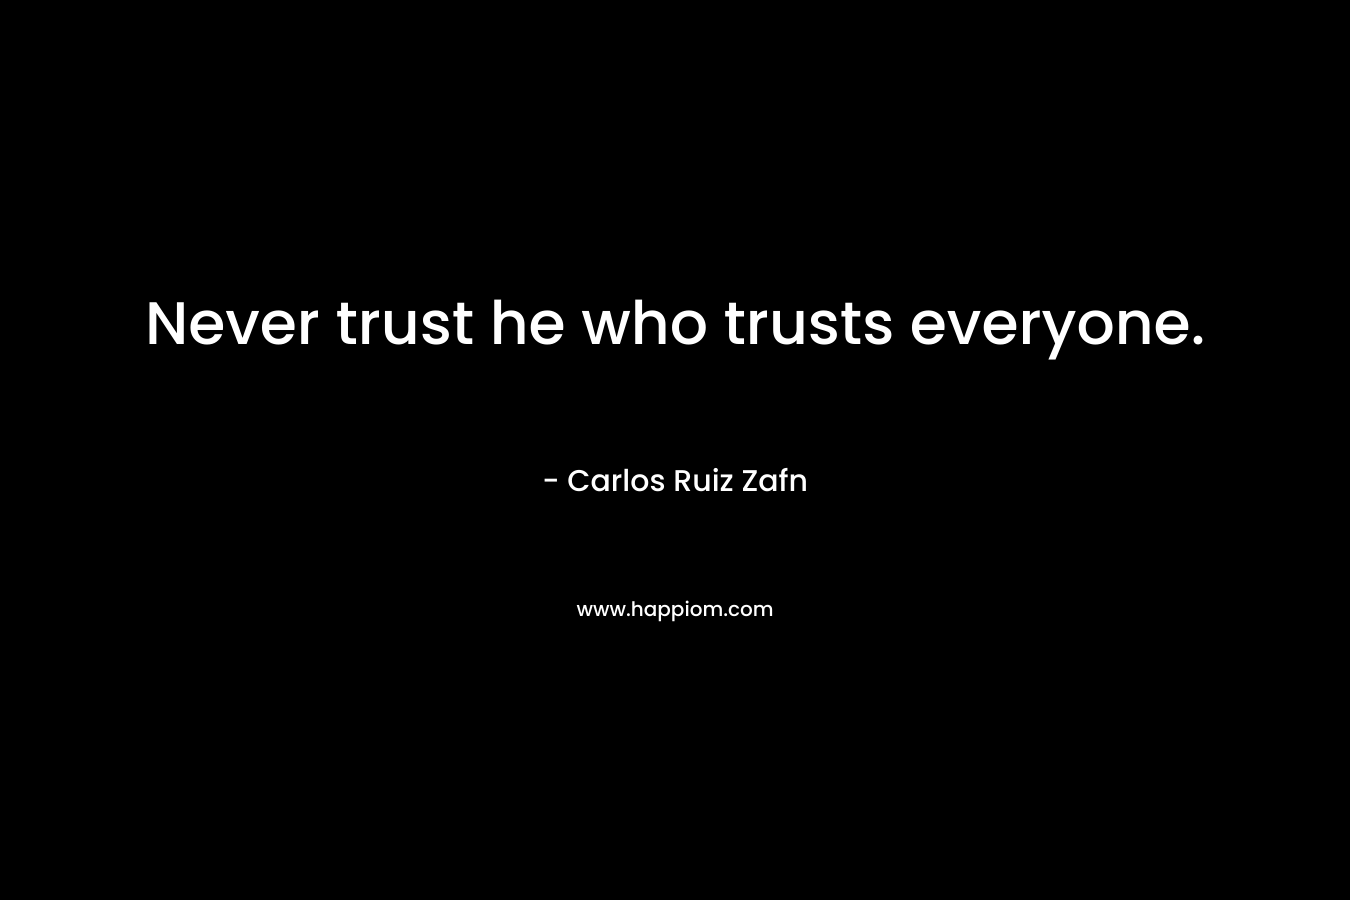 Never trust he who trusts everyone.